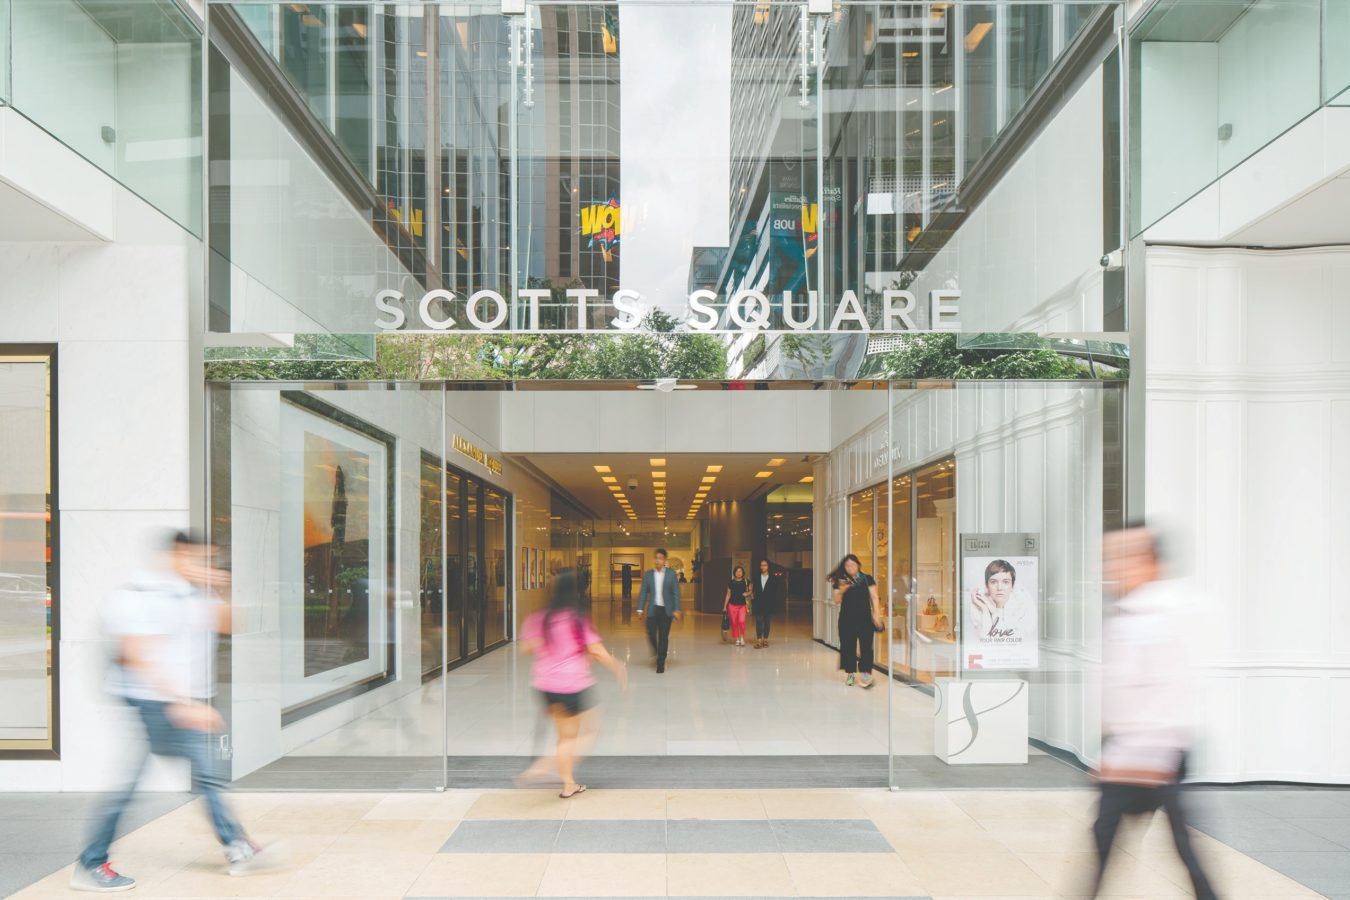 Experience a world of luxury at Scotts Square